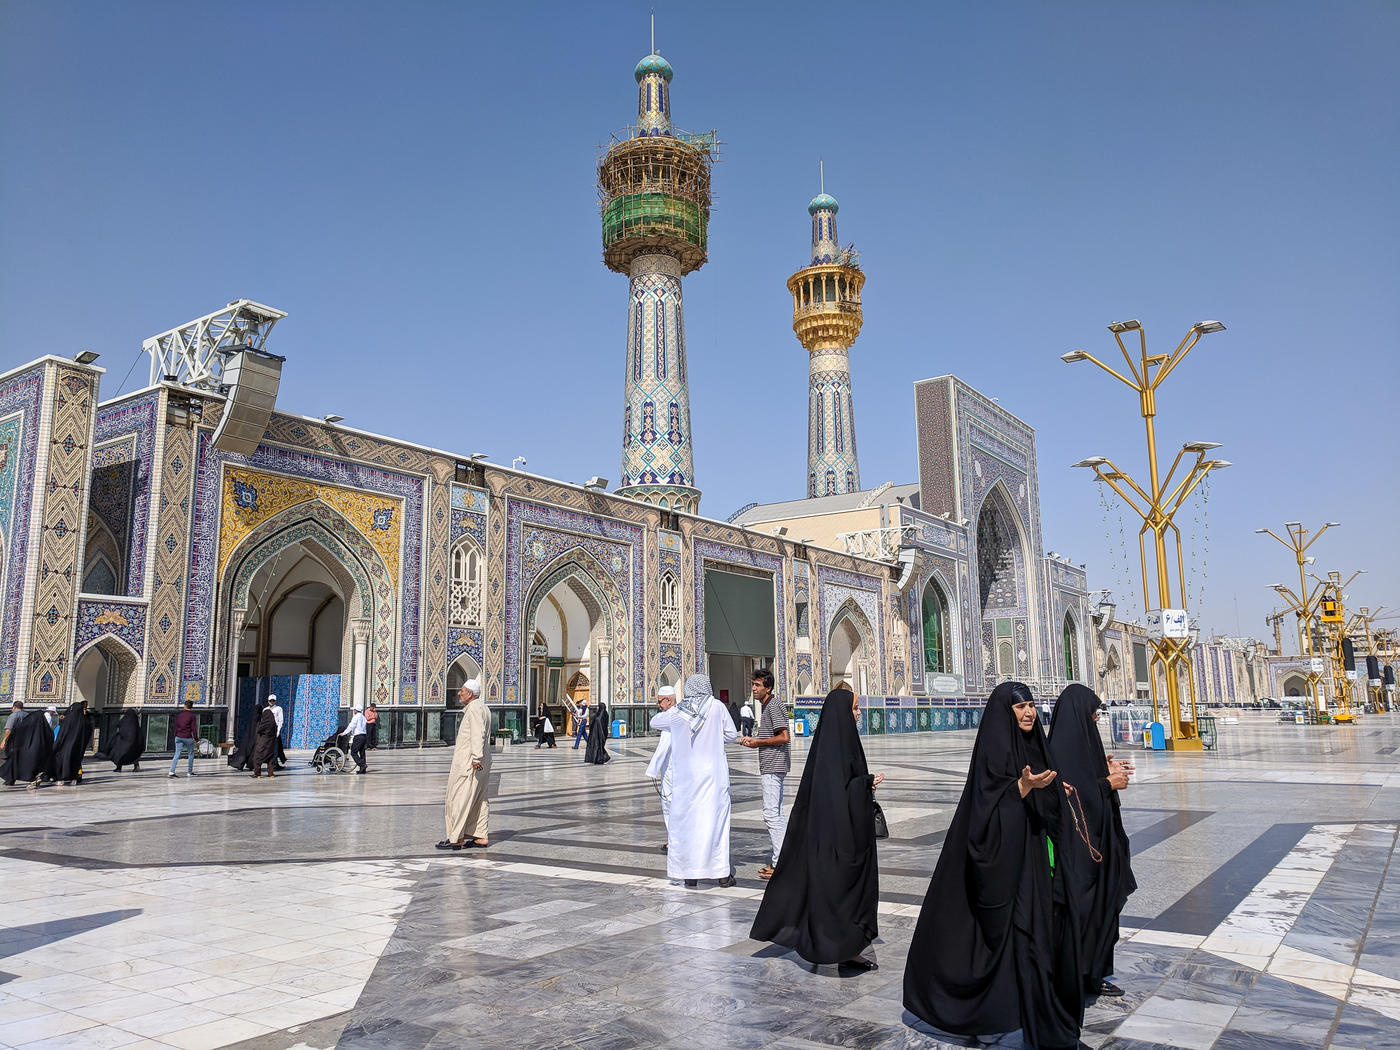 In pictures: How Iran's mosques have shaped its cities | Middle East Eye